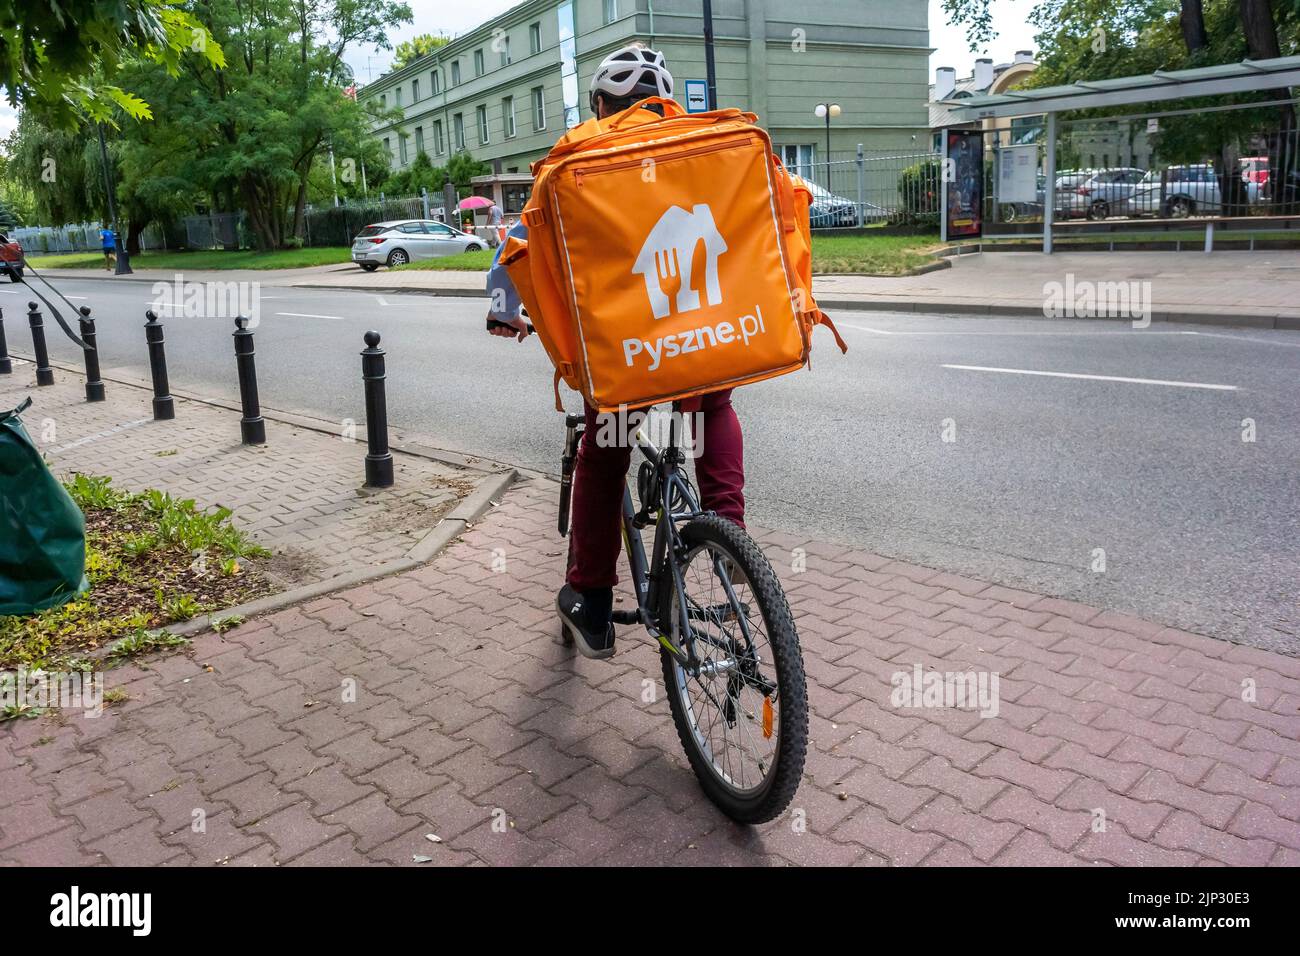 Warsaw, Poland, Street Scene, Food Delivery Man on Bicycle, Old Town Center Stock Photo